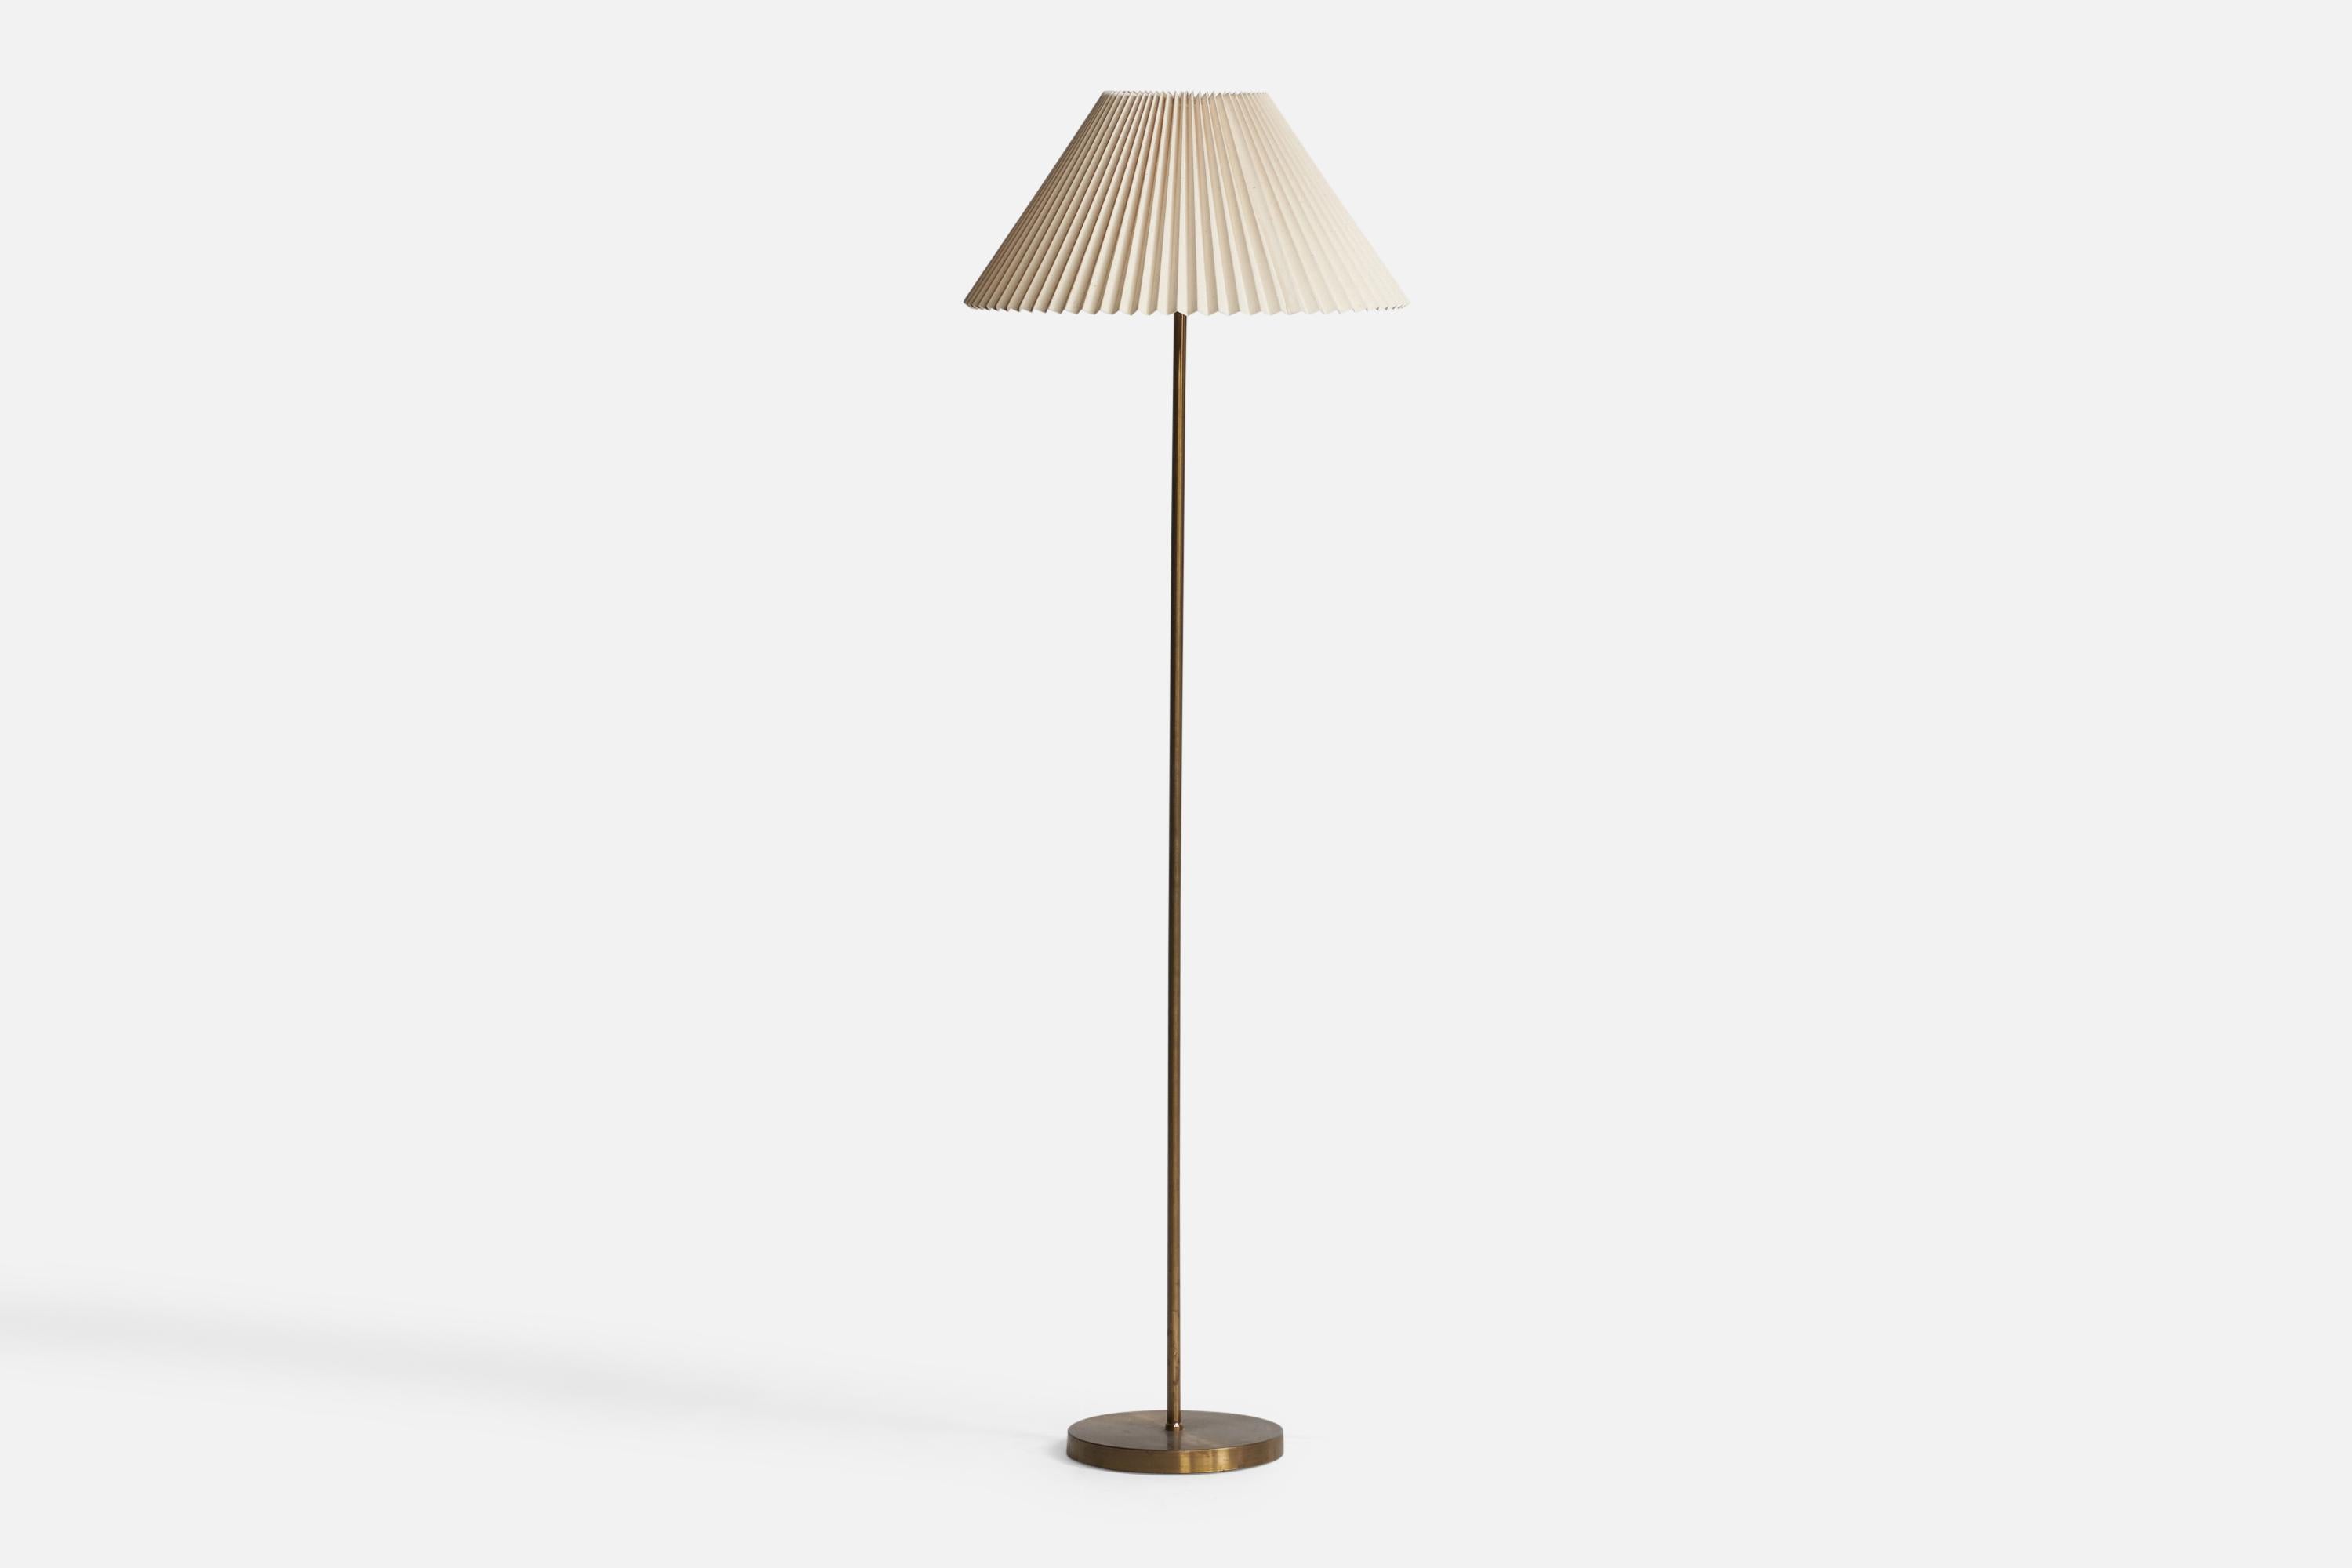 A brass and paper floor lamp designed and produced in Sweden, c. 1950s.

Overall Dimensions (inches): 60” H x 19” W x 19” D. Diameter of base is 9.5”, diameter of shade is 19”. Stated dimensions include shade.
Bulb Specifications: E-26 Bulb
Number